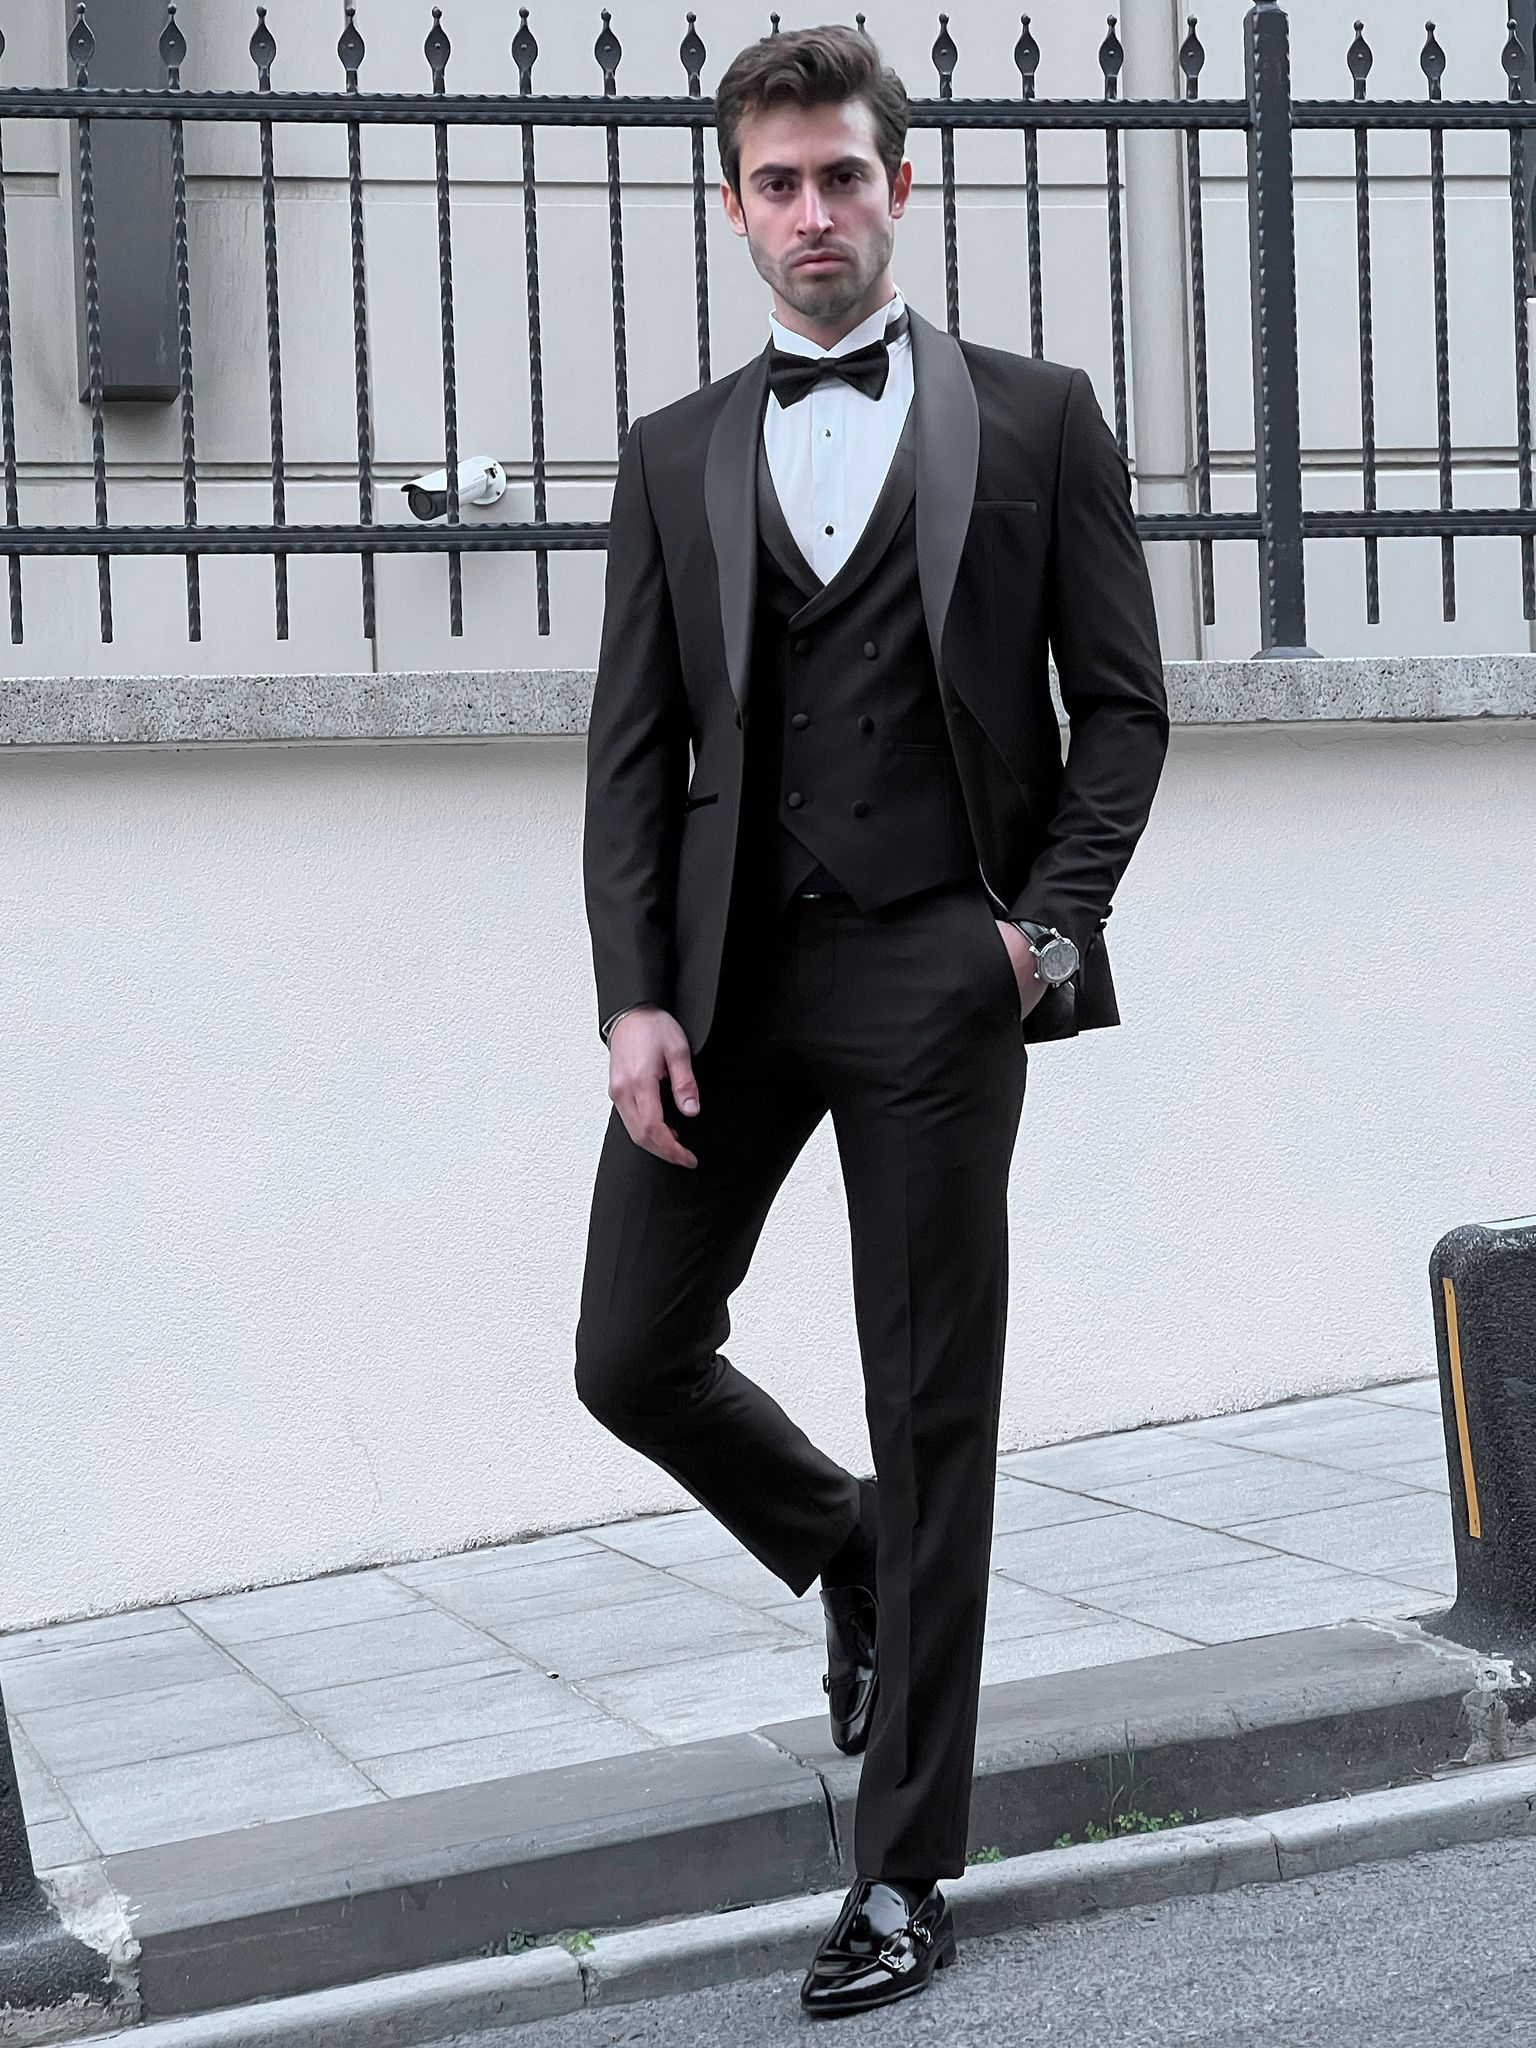 Louis Slim Fit High Quality Shawl Collared Black Party Tuxedo